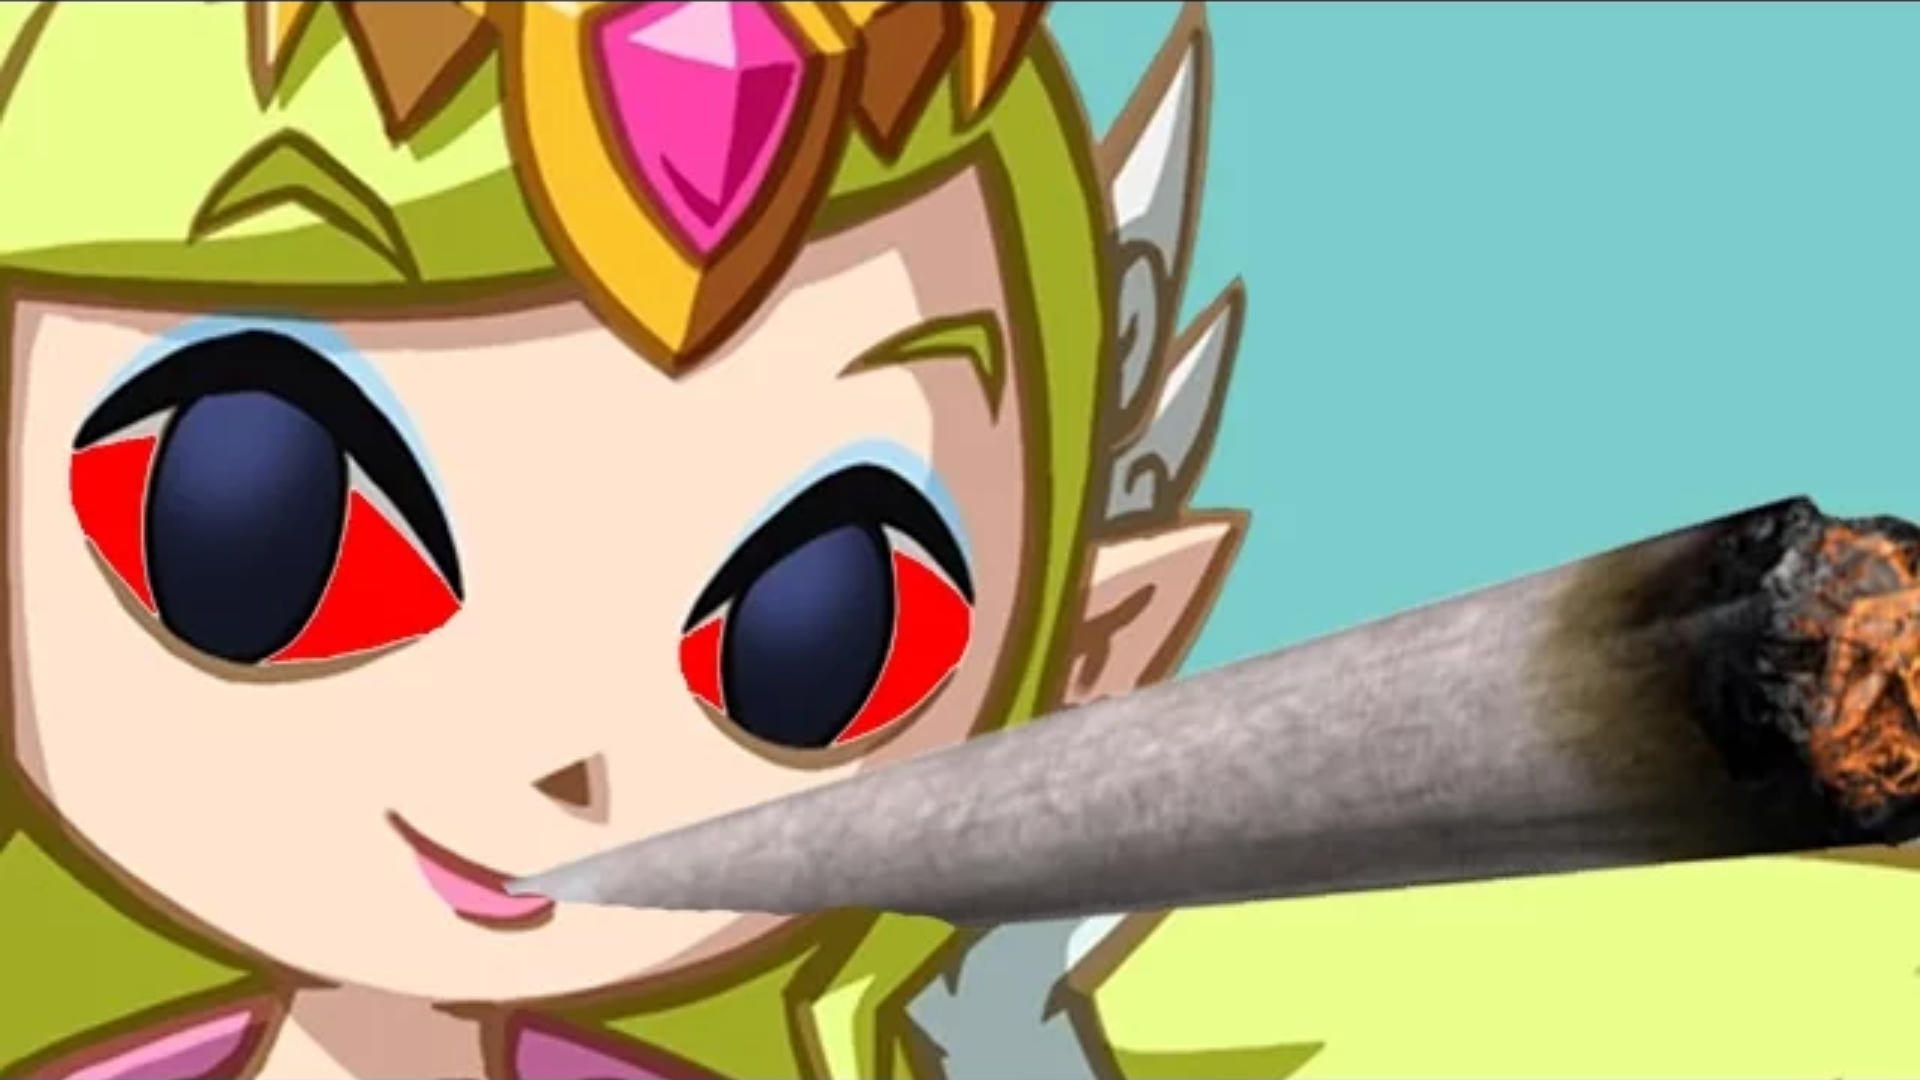 High Quality Zelda is Stoned! Blank Meme Template